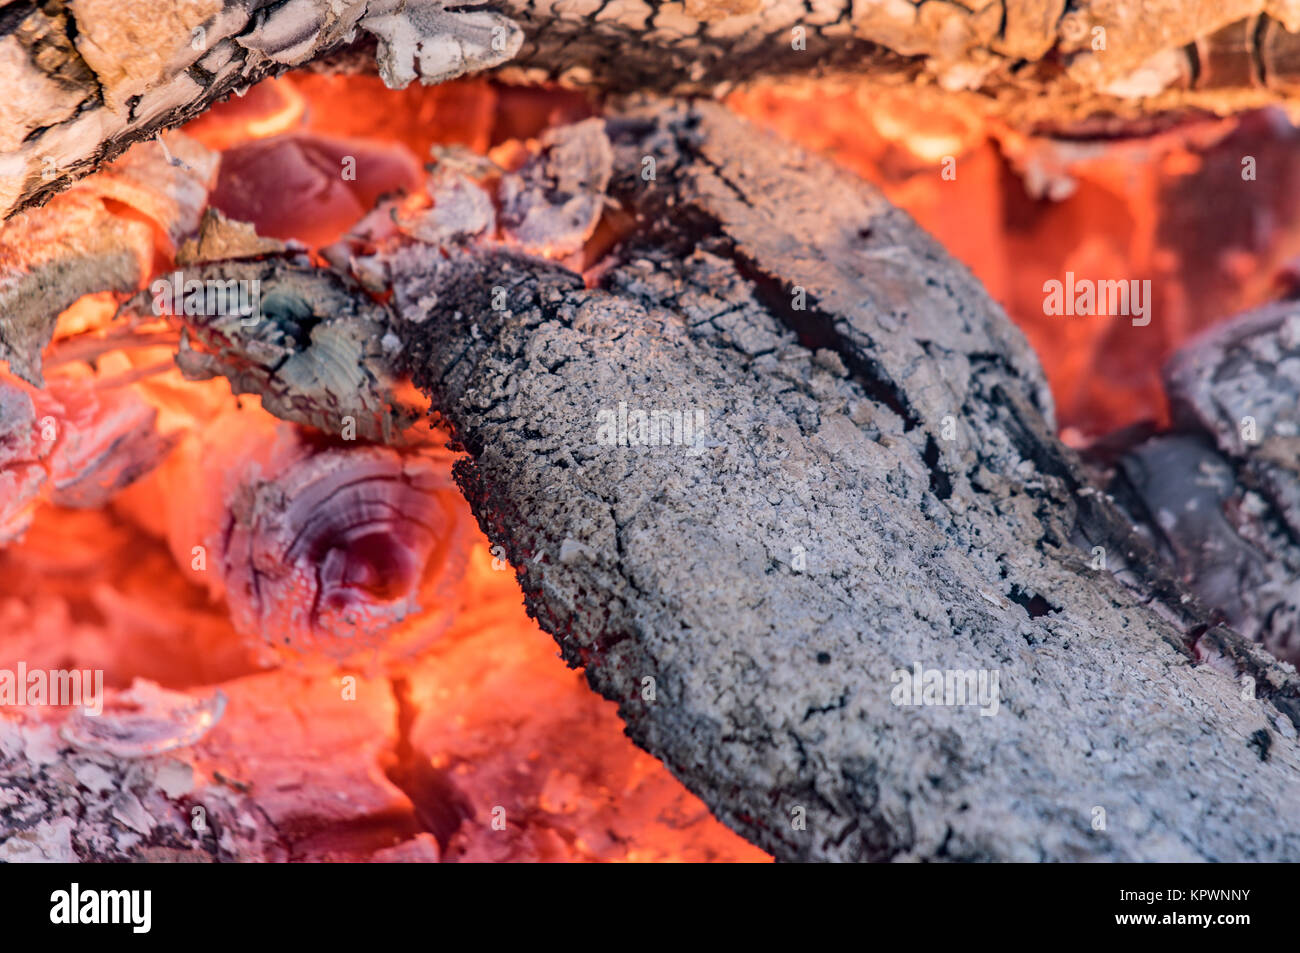 Close-up of the burning embers in the wood fire Stock Photo